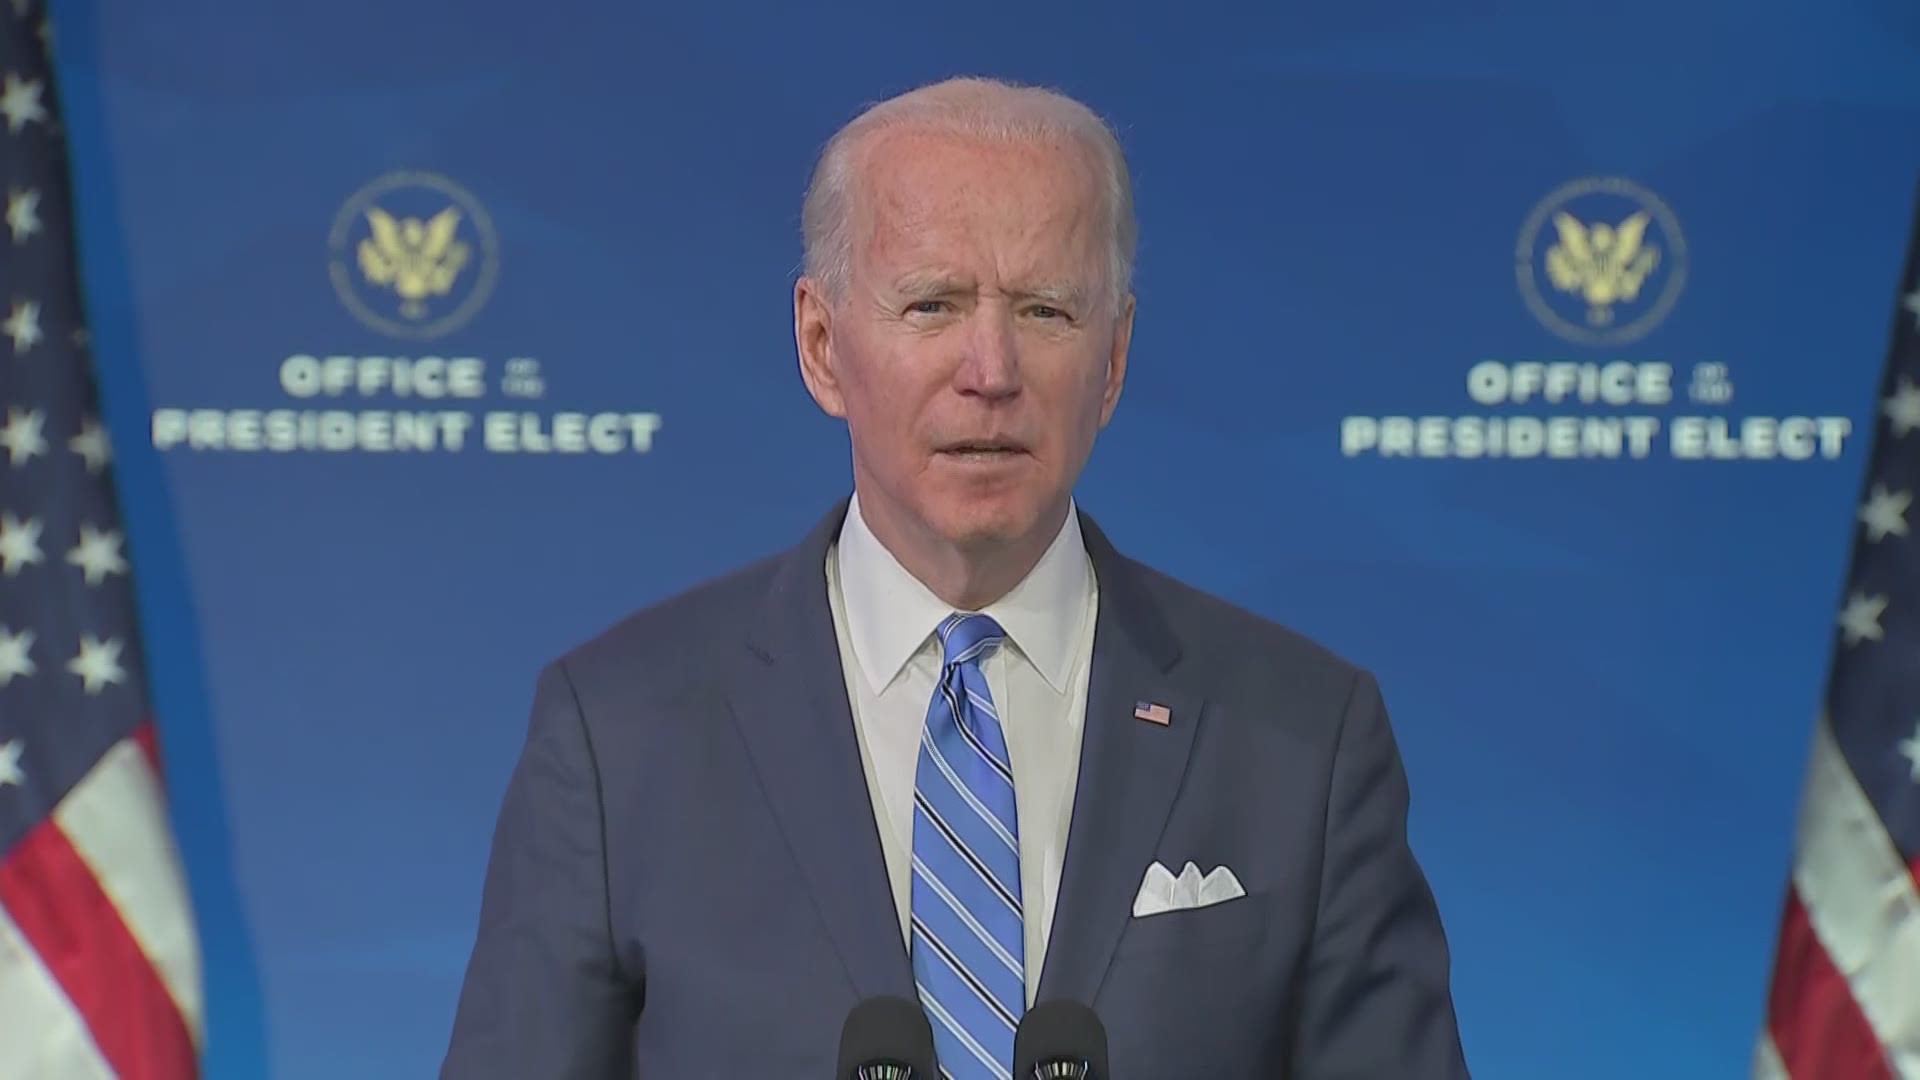 President-elect Joe Biden laid out his economic relief plan due to the coronavirus pandemic, including help for families, businesses and landlords.